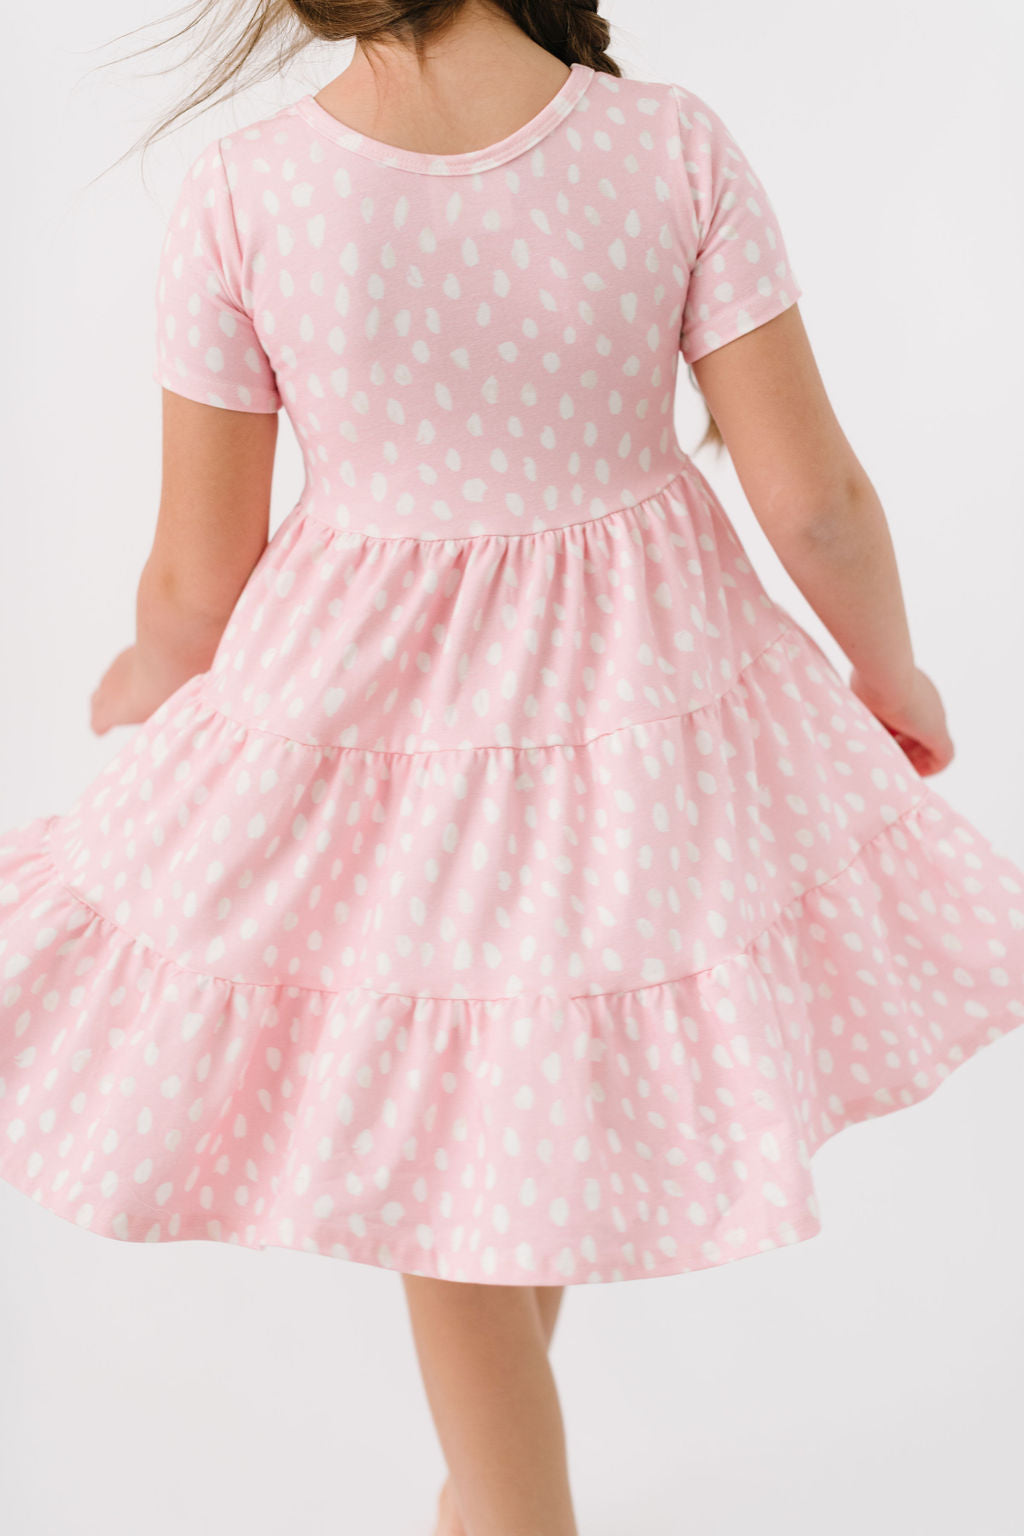 Painted Dots in Rose Shadow Short Sleeve Three Tier Twirly Dress